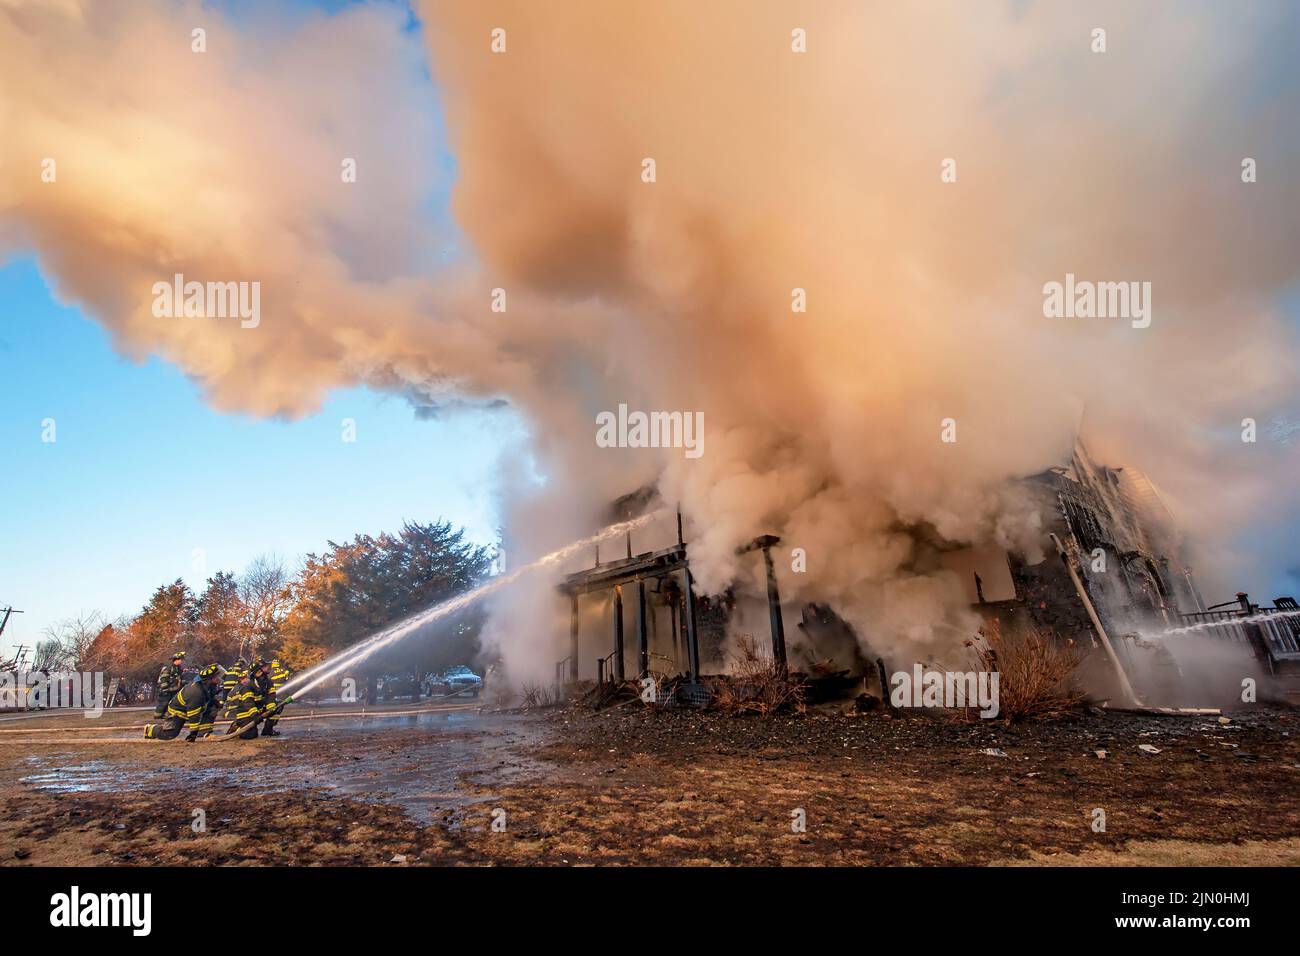 Teams of firefighters work to extinguish the fire as shortly before 6:00 a.m. on Saturday, March 8th, 2014 the Bridgehampton Fire Department was calle Stock Photo